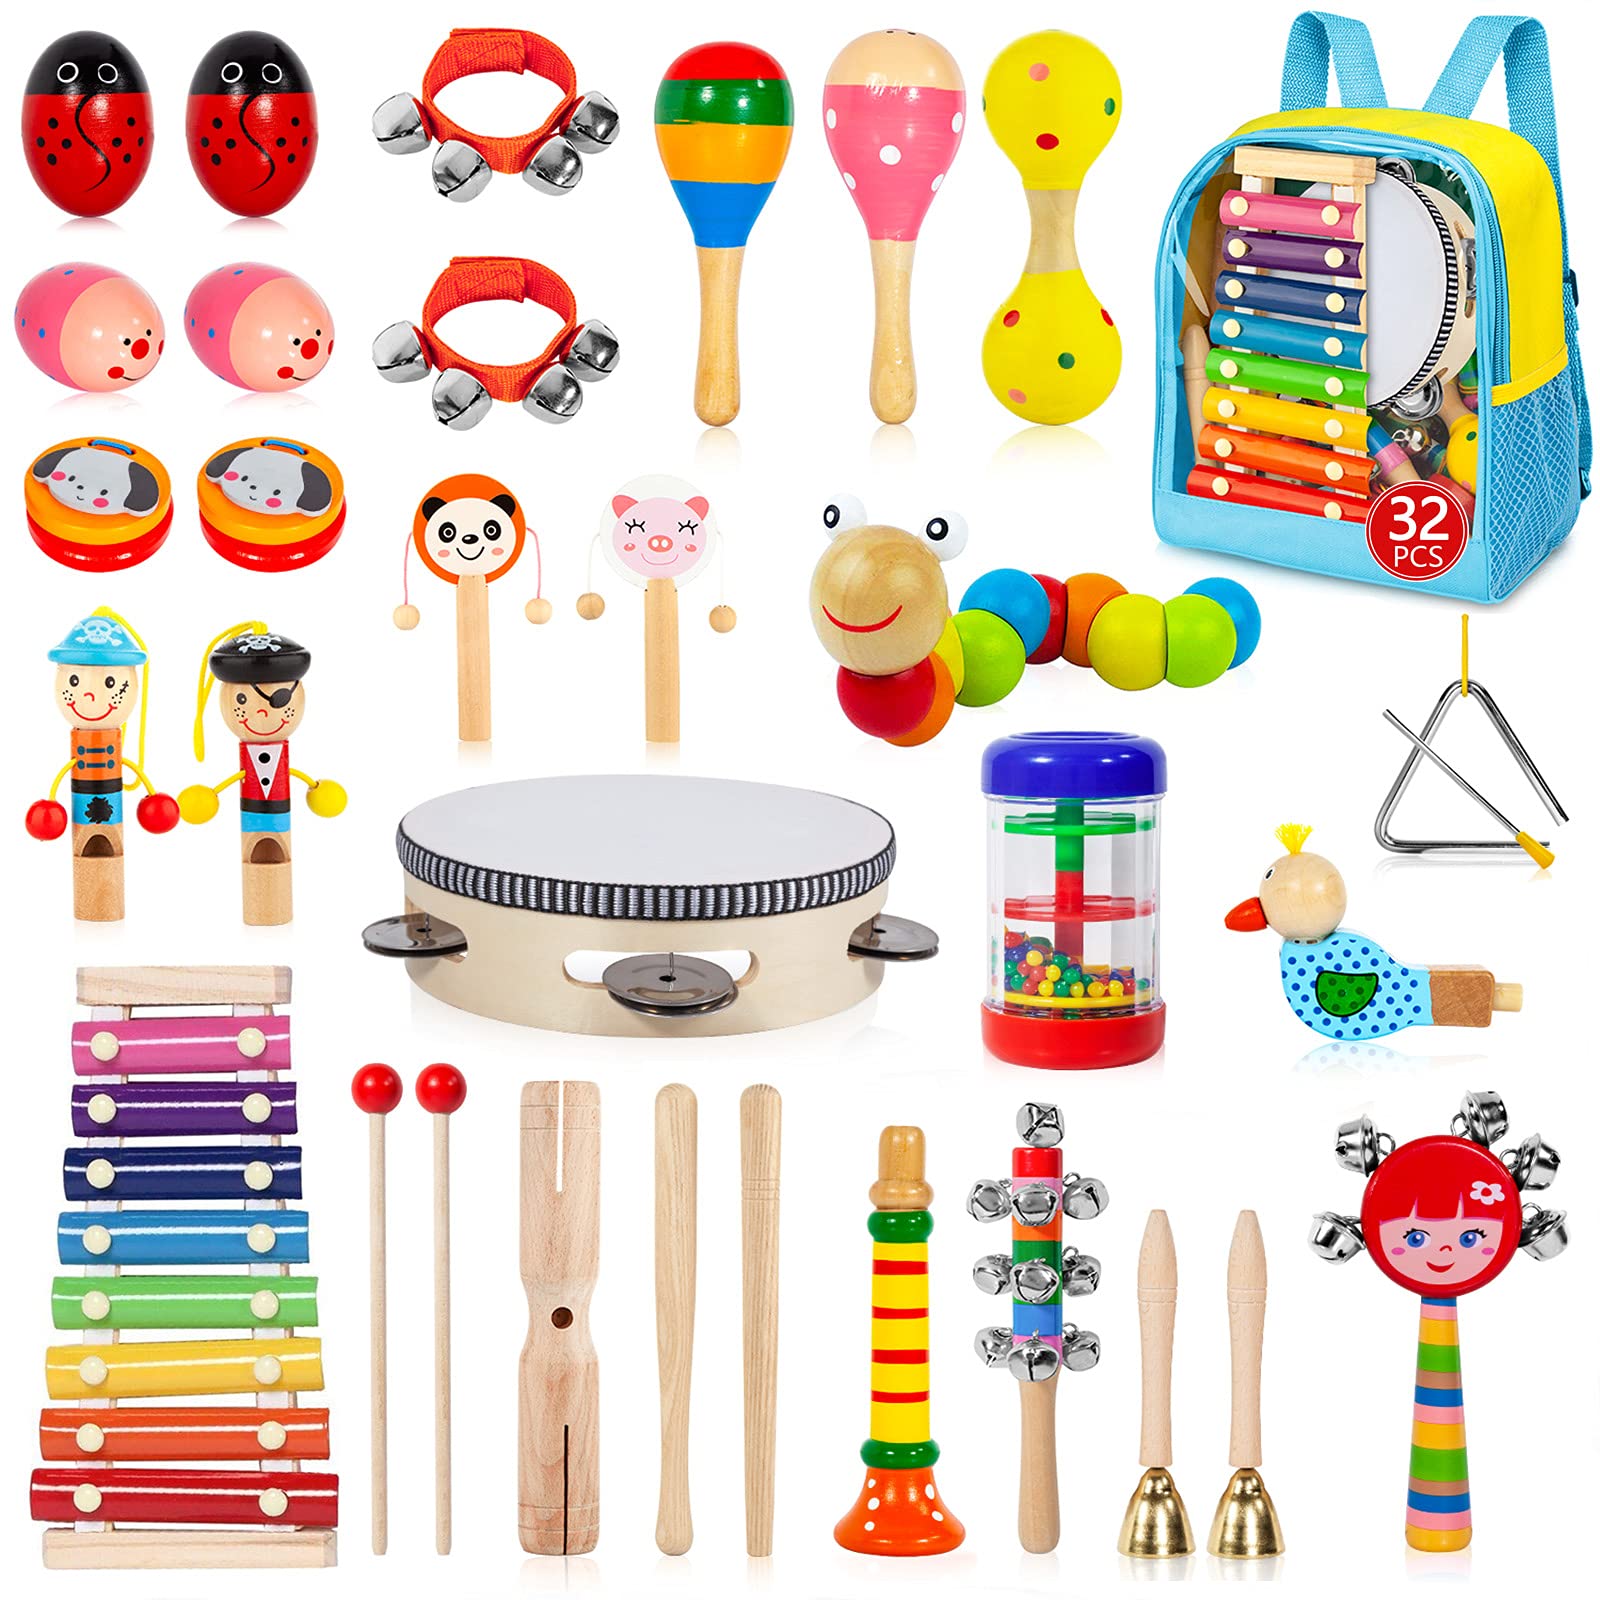 Gouezcc Toddler Musical Instruments Set, 32 PCS 19 Kinds Wooden Percussion Instruments Toys for Kids Playing Preschool Education, Early Learning Baby Musical Toys for Boys and Girls Gift